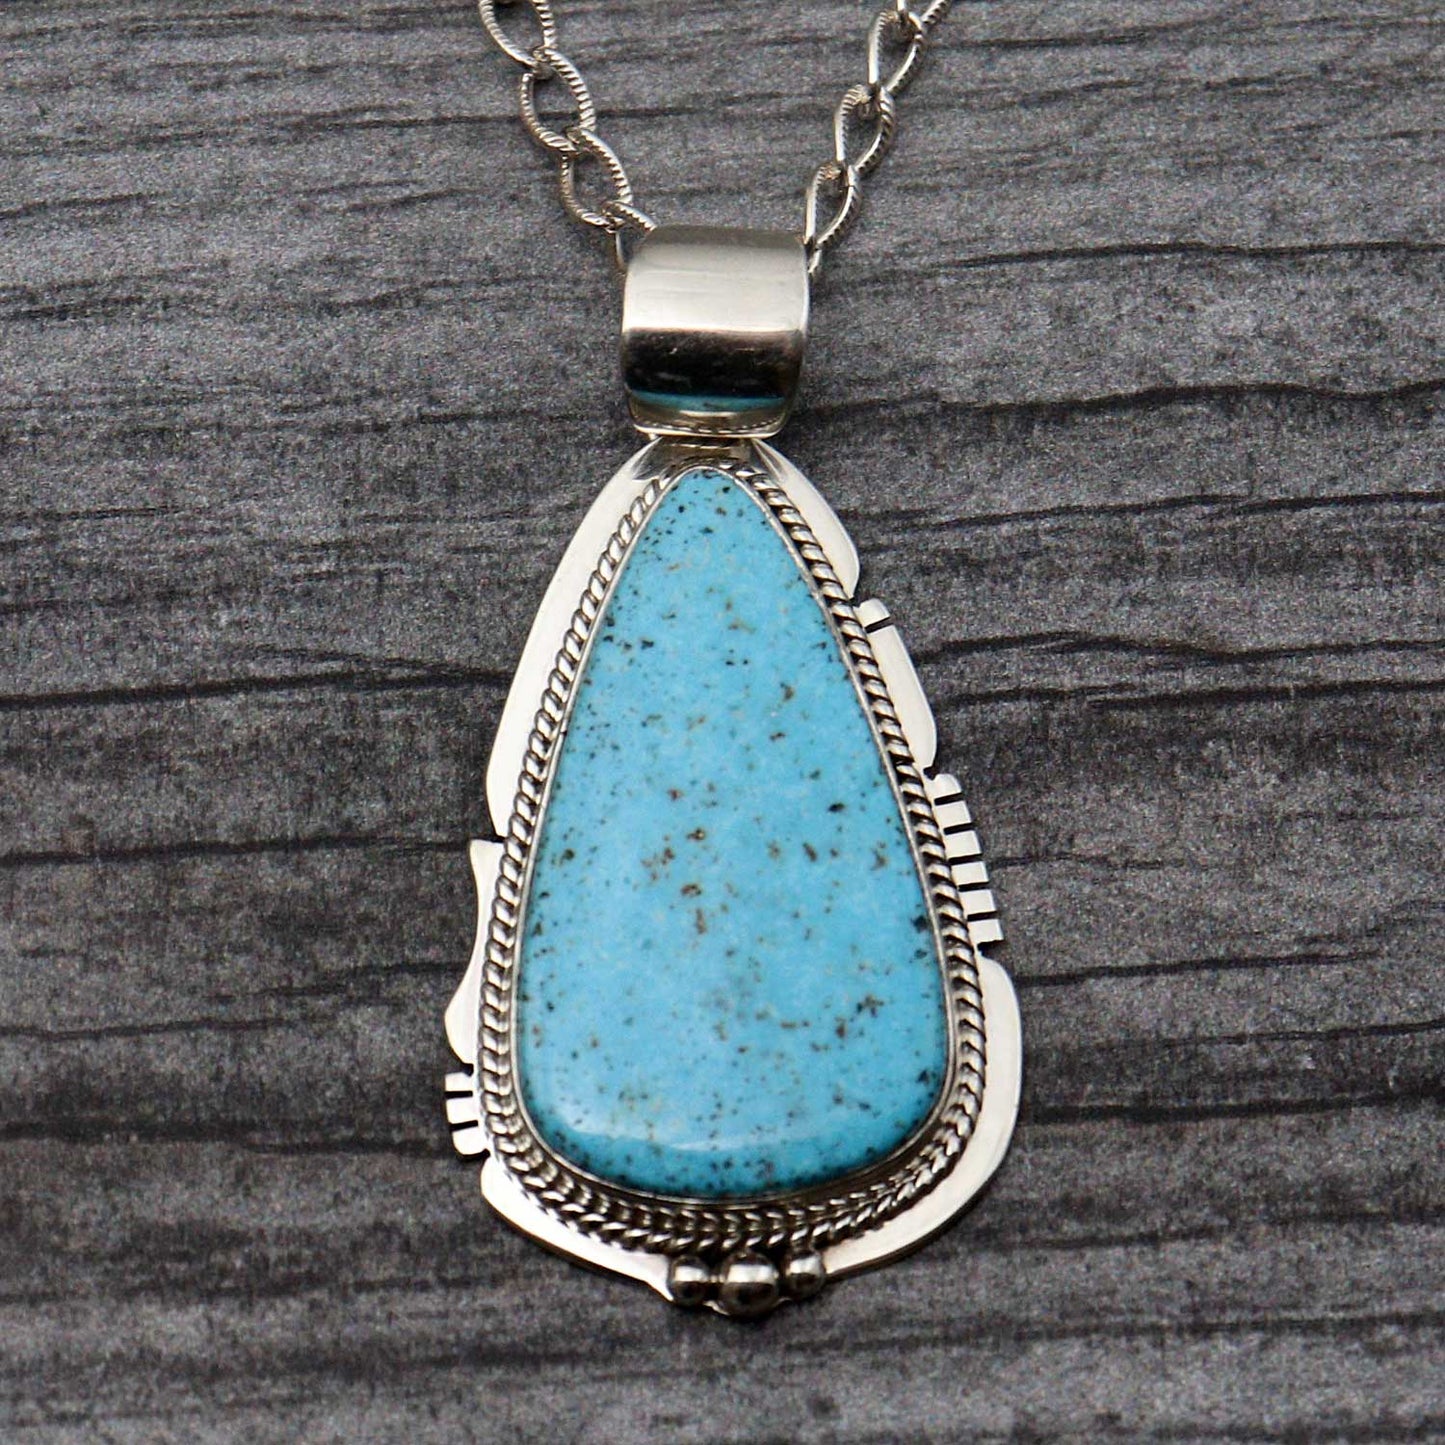 Kingman Turquoise Pendant With 18" Silver Chain